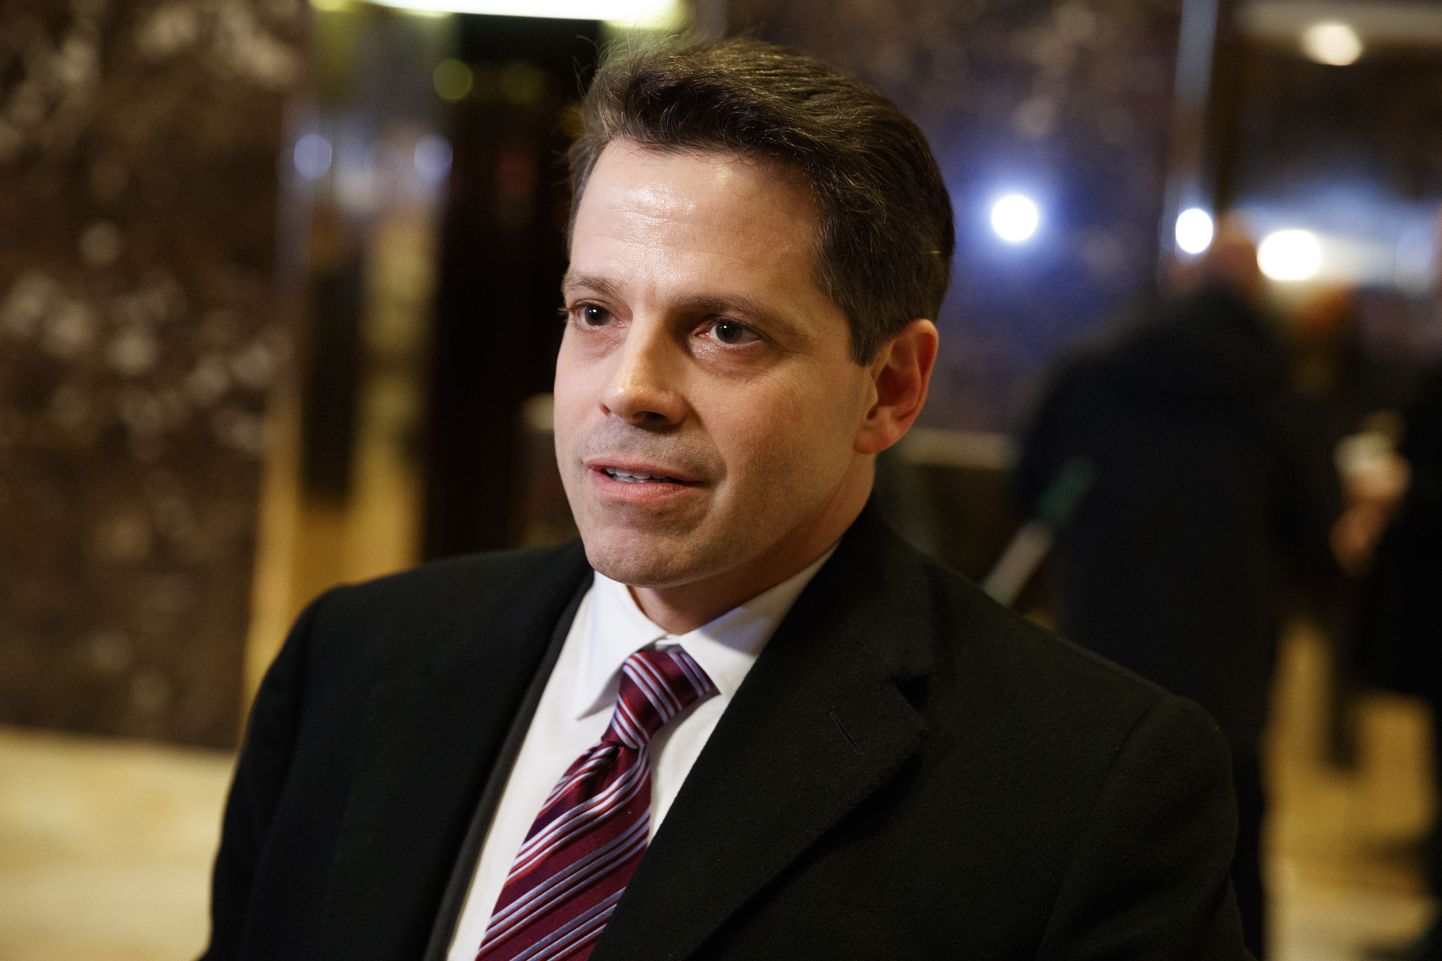 Anthony Scaramucci, a senior adviser to President-elect Donald Trump, talks to reporters in the lobby of Trump Tower in New York, Friday, Jan. 13, 2017. (AP Photo/Evan Vucci)